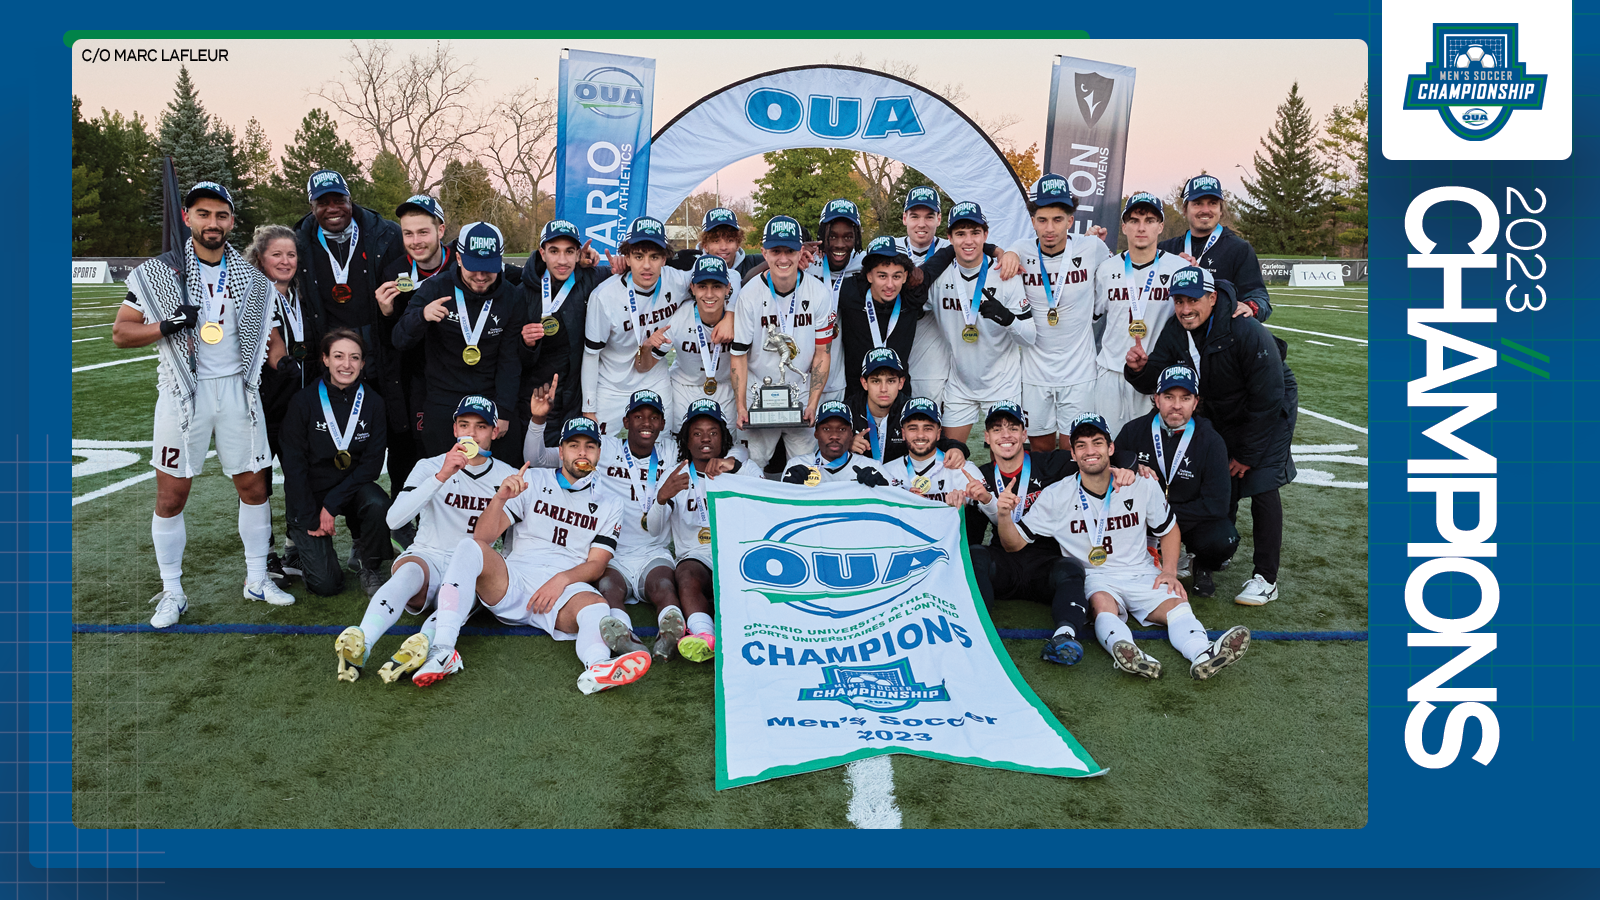 Predominantly blue graphic covered mostly by 2023 OUA Men's Soccer Championship banner photo, with the corresponding championship logo and white text reading '2023 Champions' on the right side